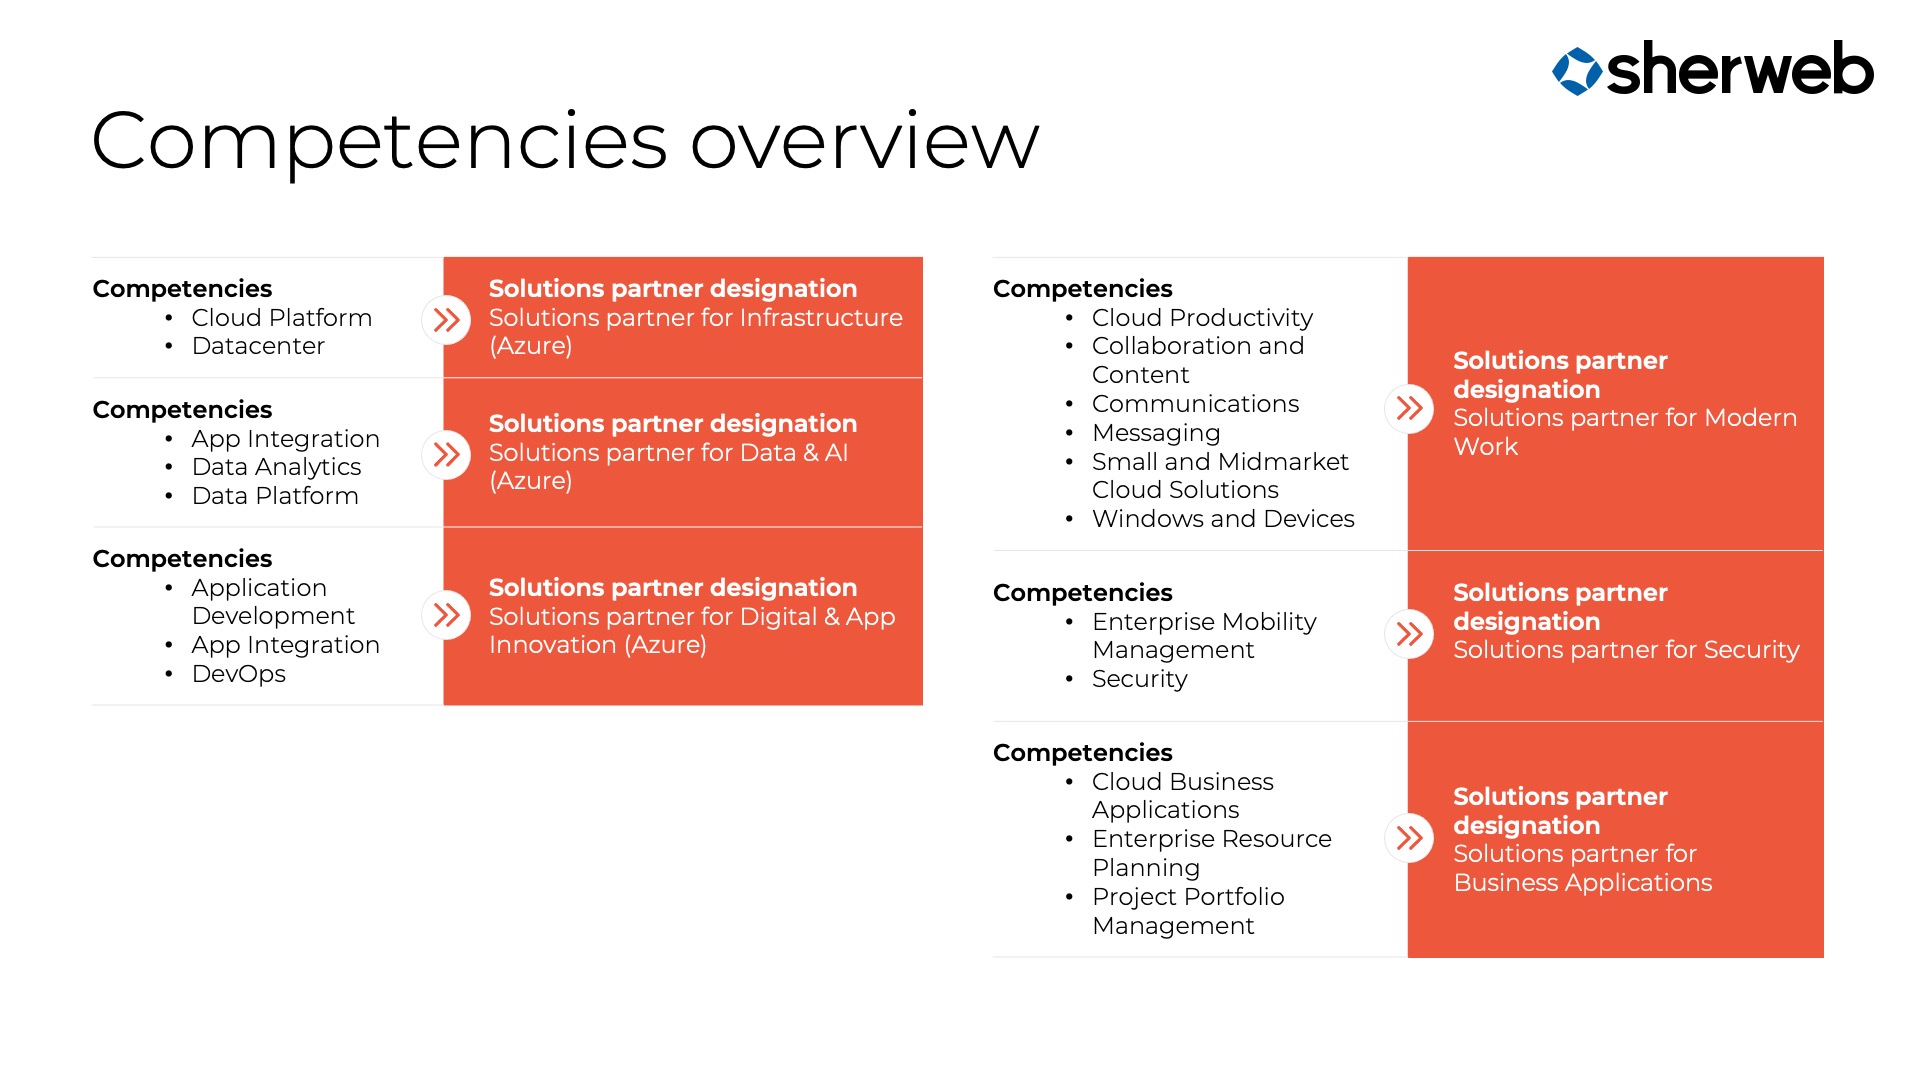 Table outlining how previous Microsoft Silver and Gold competencies map to new Solutions partner designations